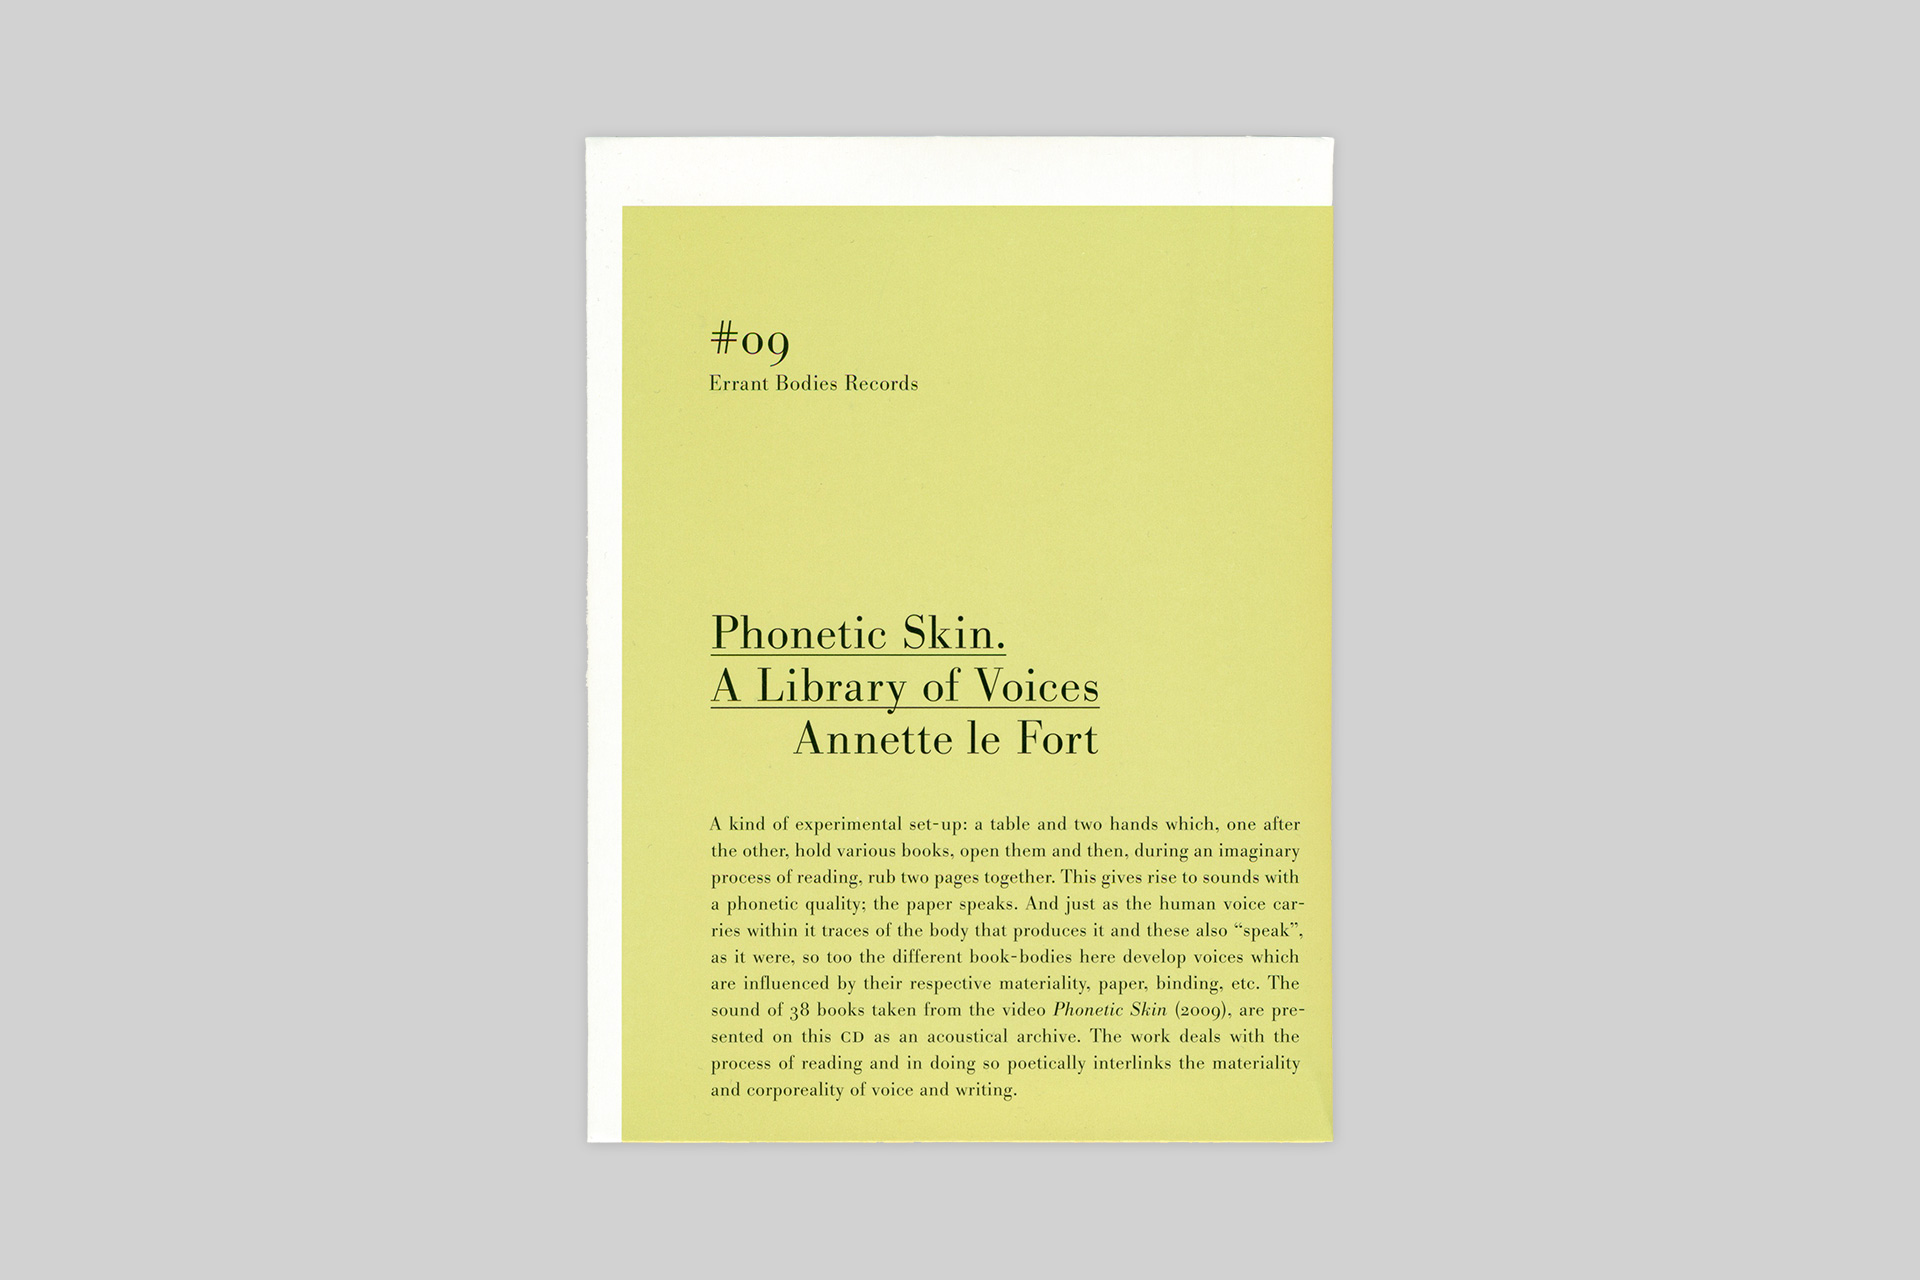 Phonetic Skin. A Library of Voices